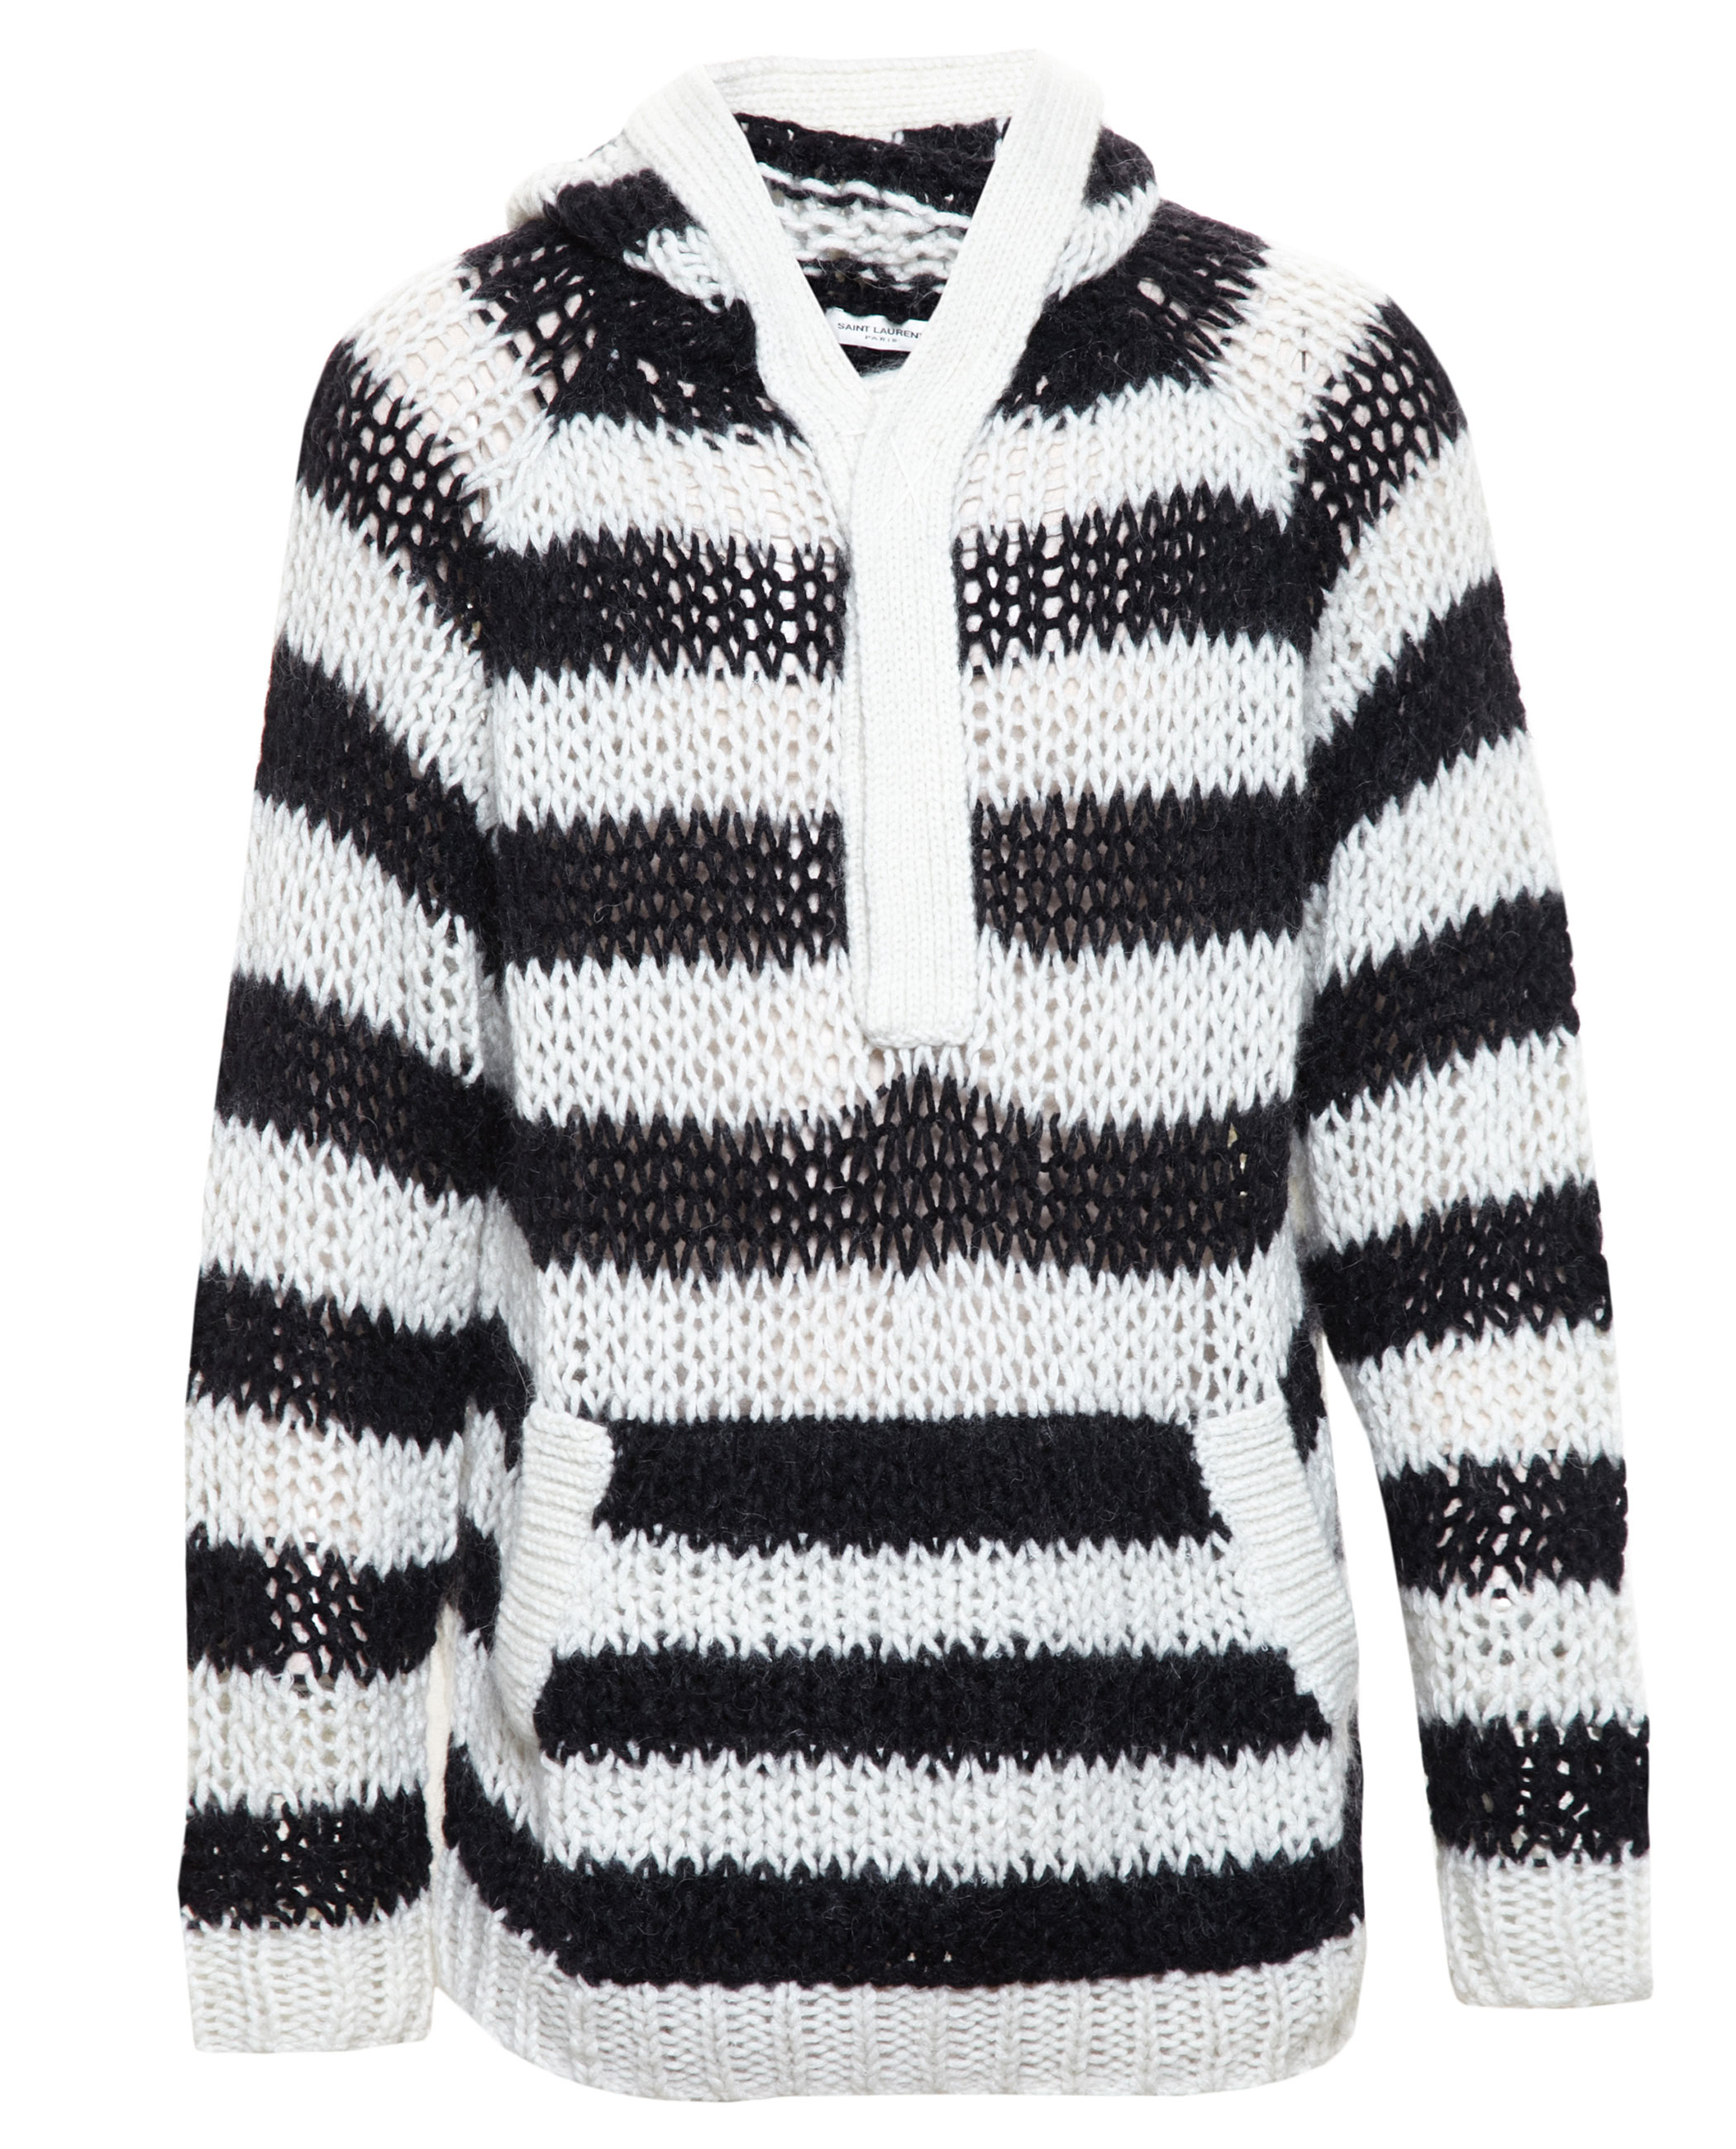 Saint Laurent Hooded Striped Wool & Mohair Sweater in Black White 